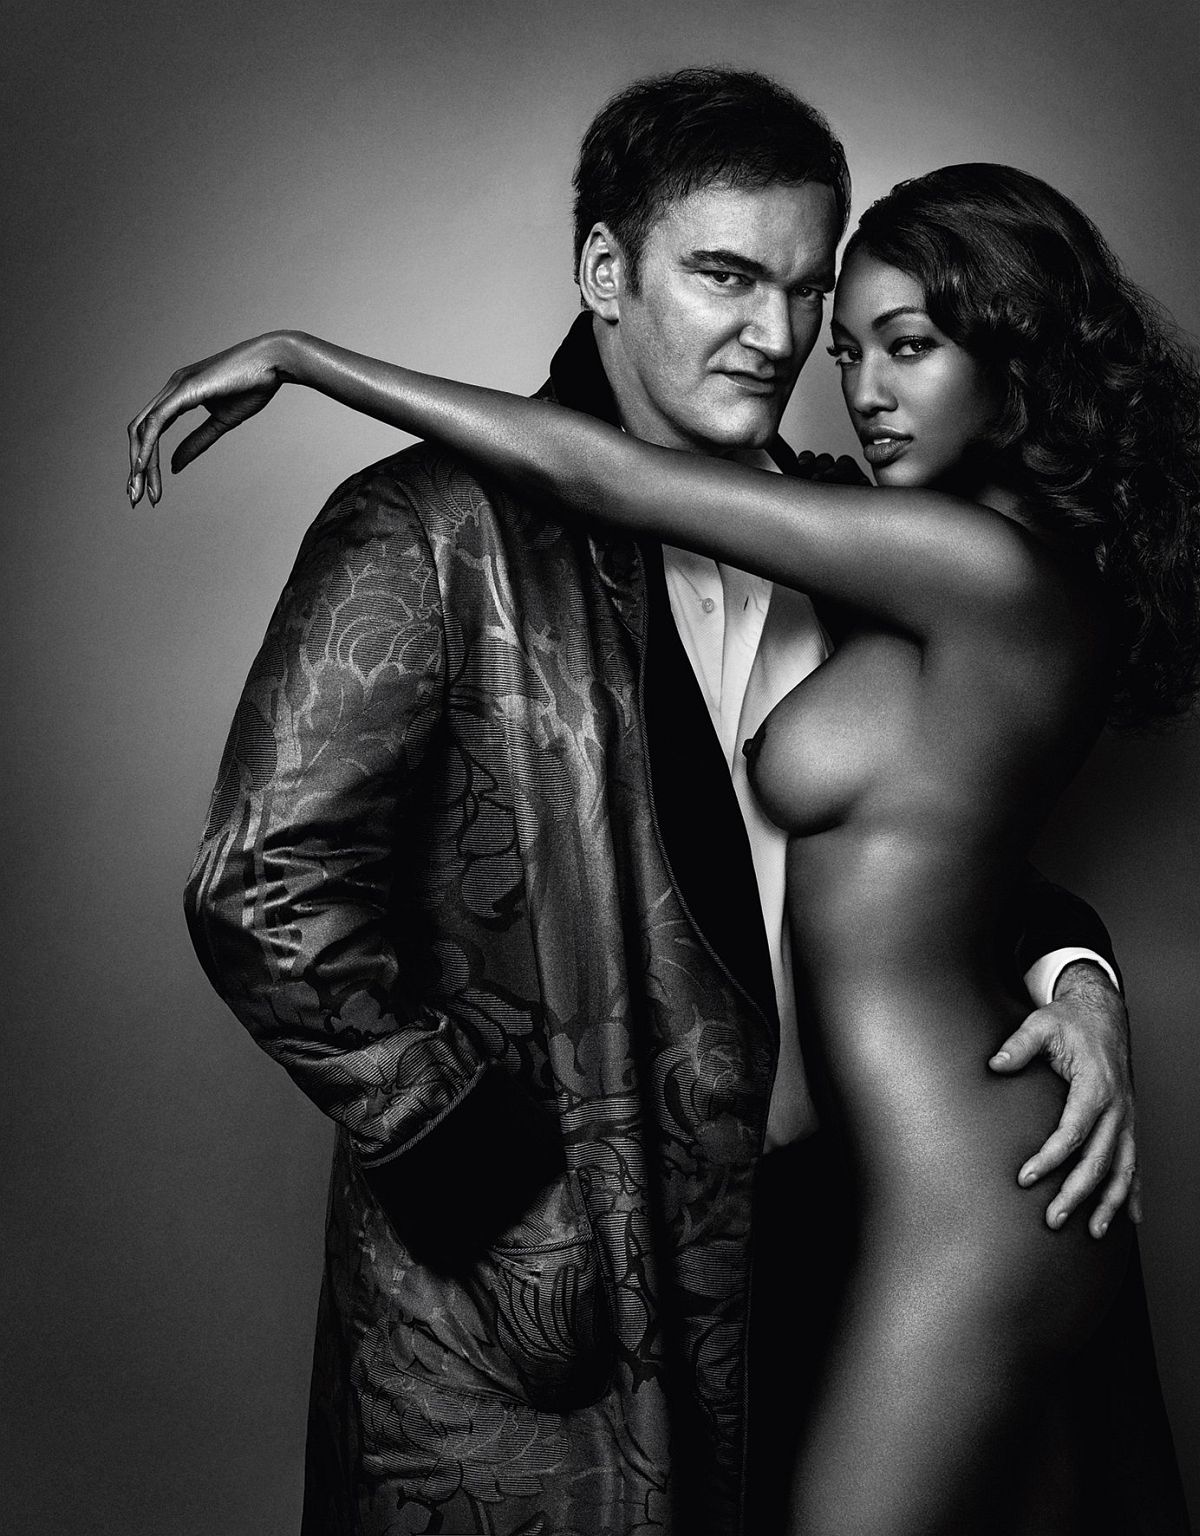 © Profiles by Marc Hom, published by teNeues, www.teneues.com, Quentin Tarantino and Nichole Galicia, Photo © 2016 Marc Hom